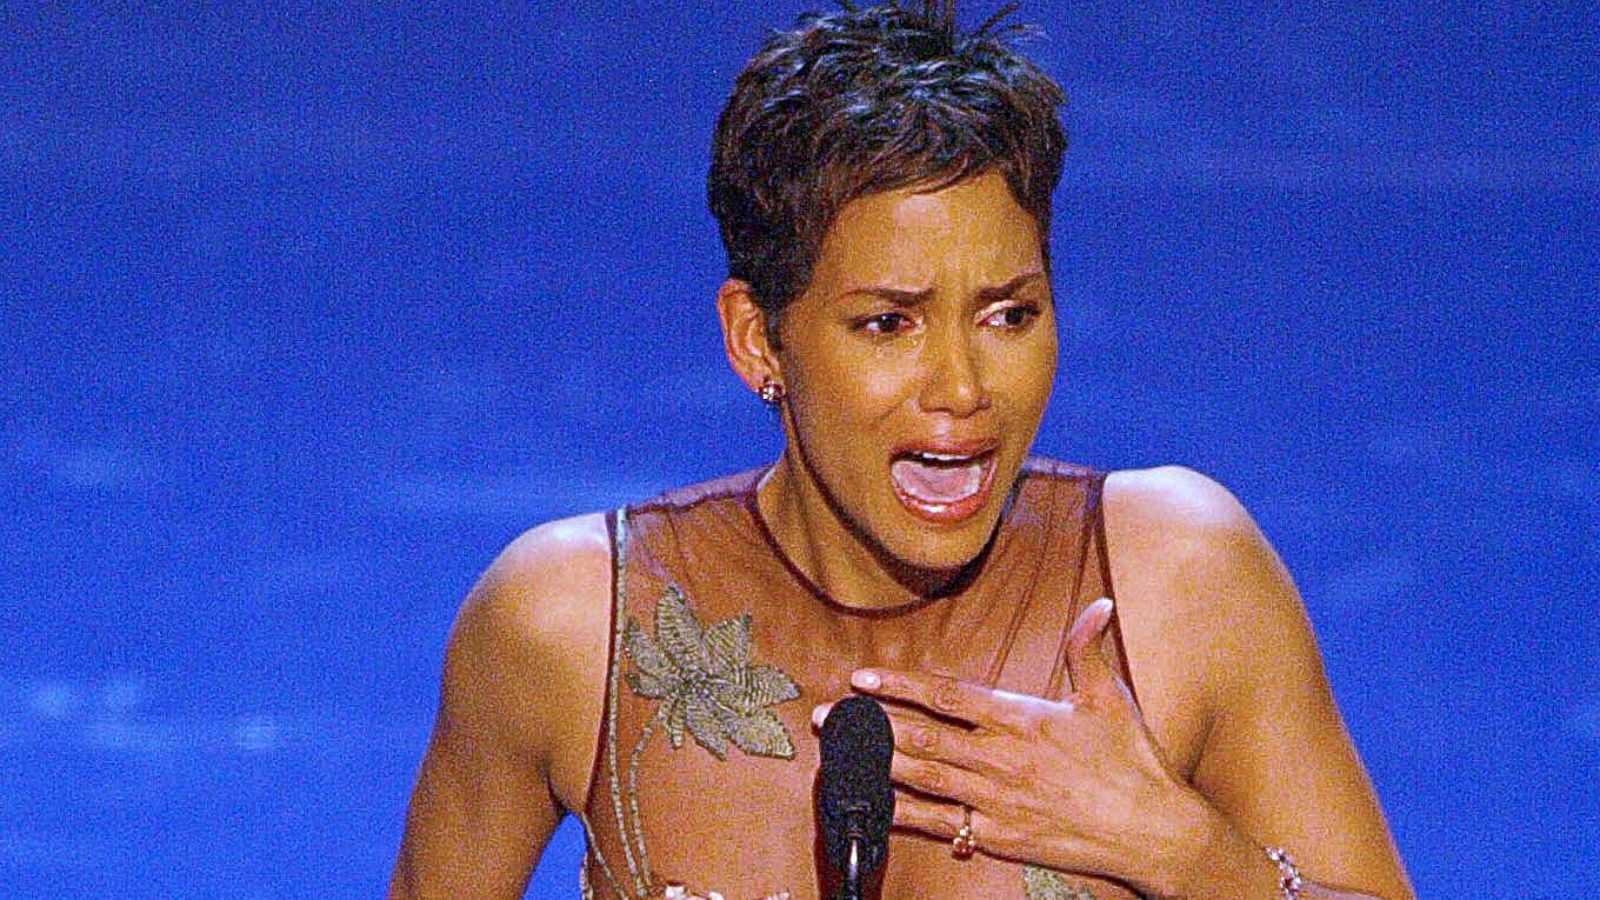 PHOTO: Actress Halle Berry accepts her Oscar for Best performance by an actress in a leading role during the 74th Academy Awards at the Kodak Theatre in Hollywood on March 24, 2002.